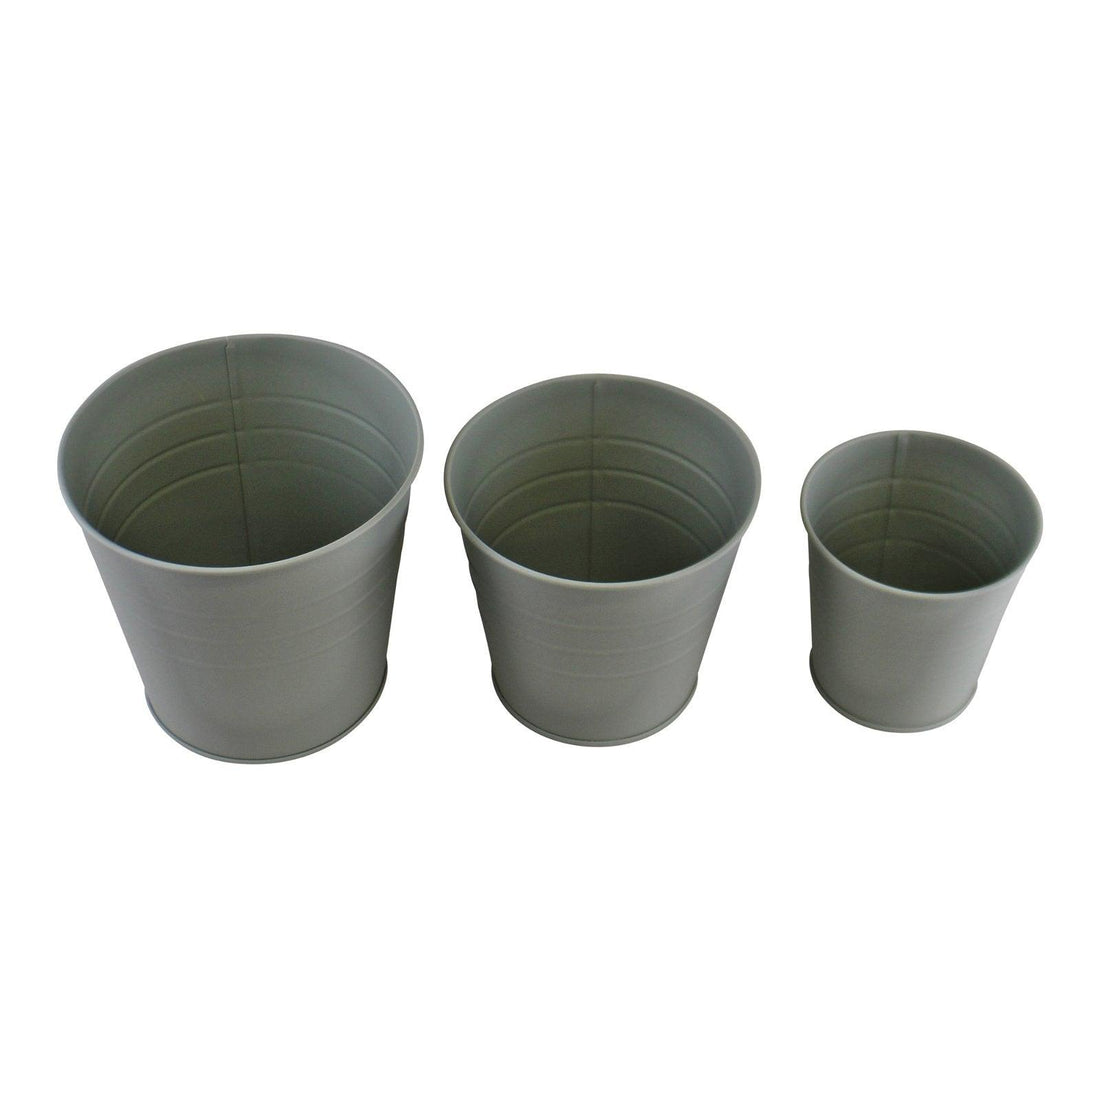 Set of 3 Round Metal Planters, Green - £20.99 - Potting Shed Accessories 